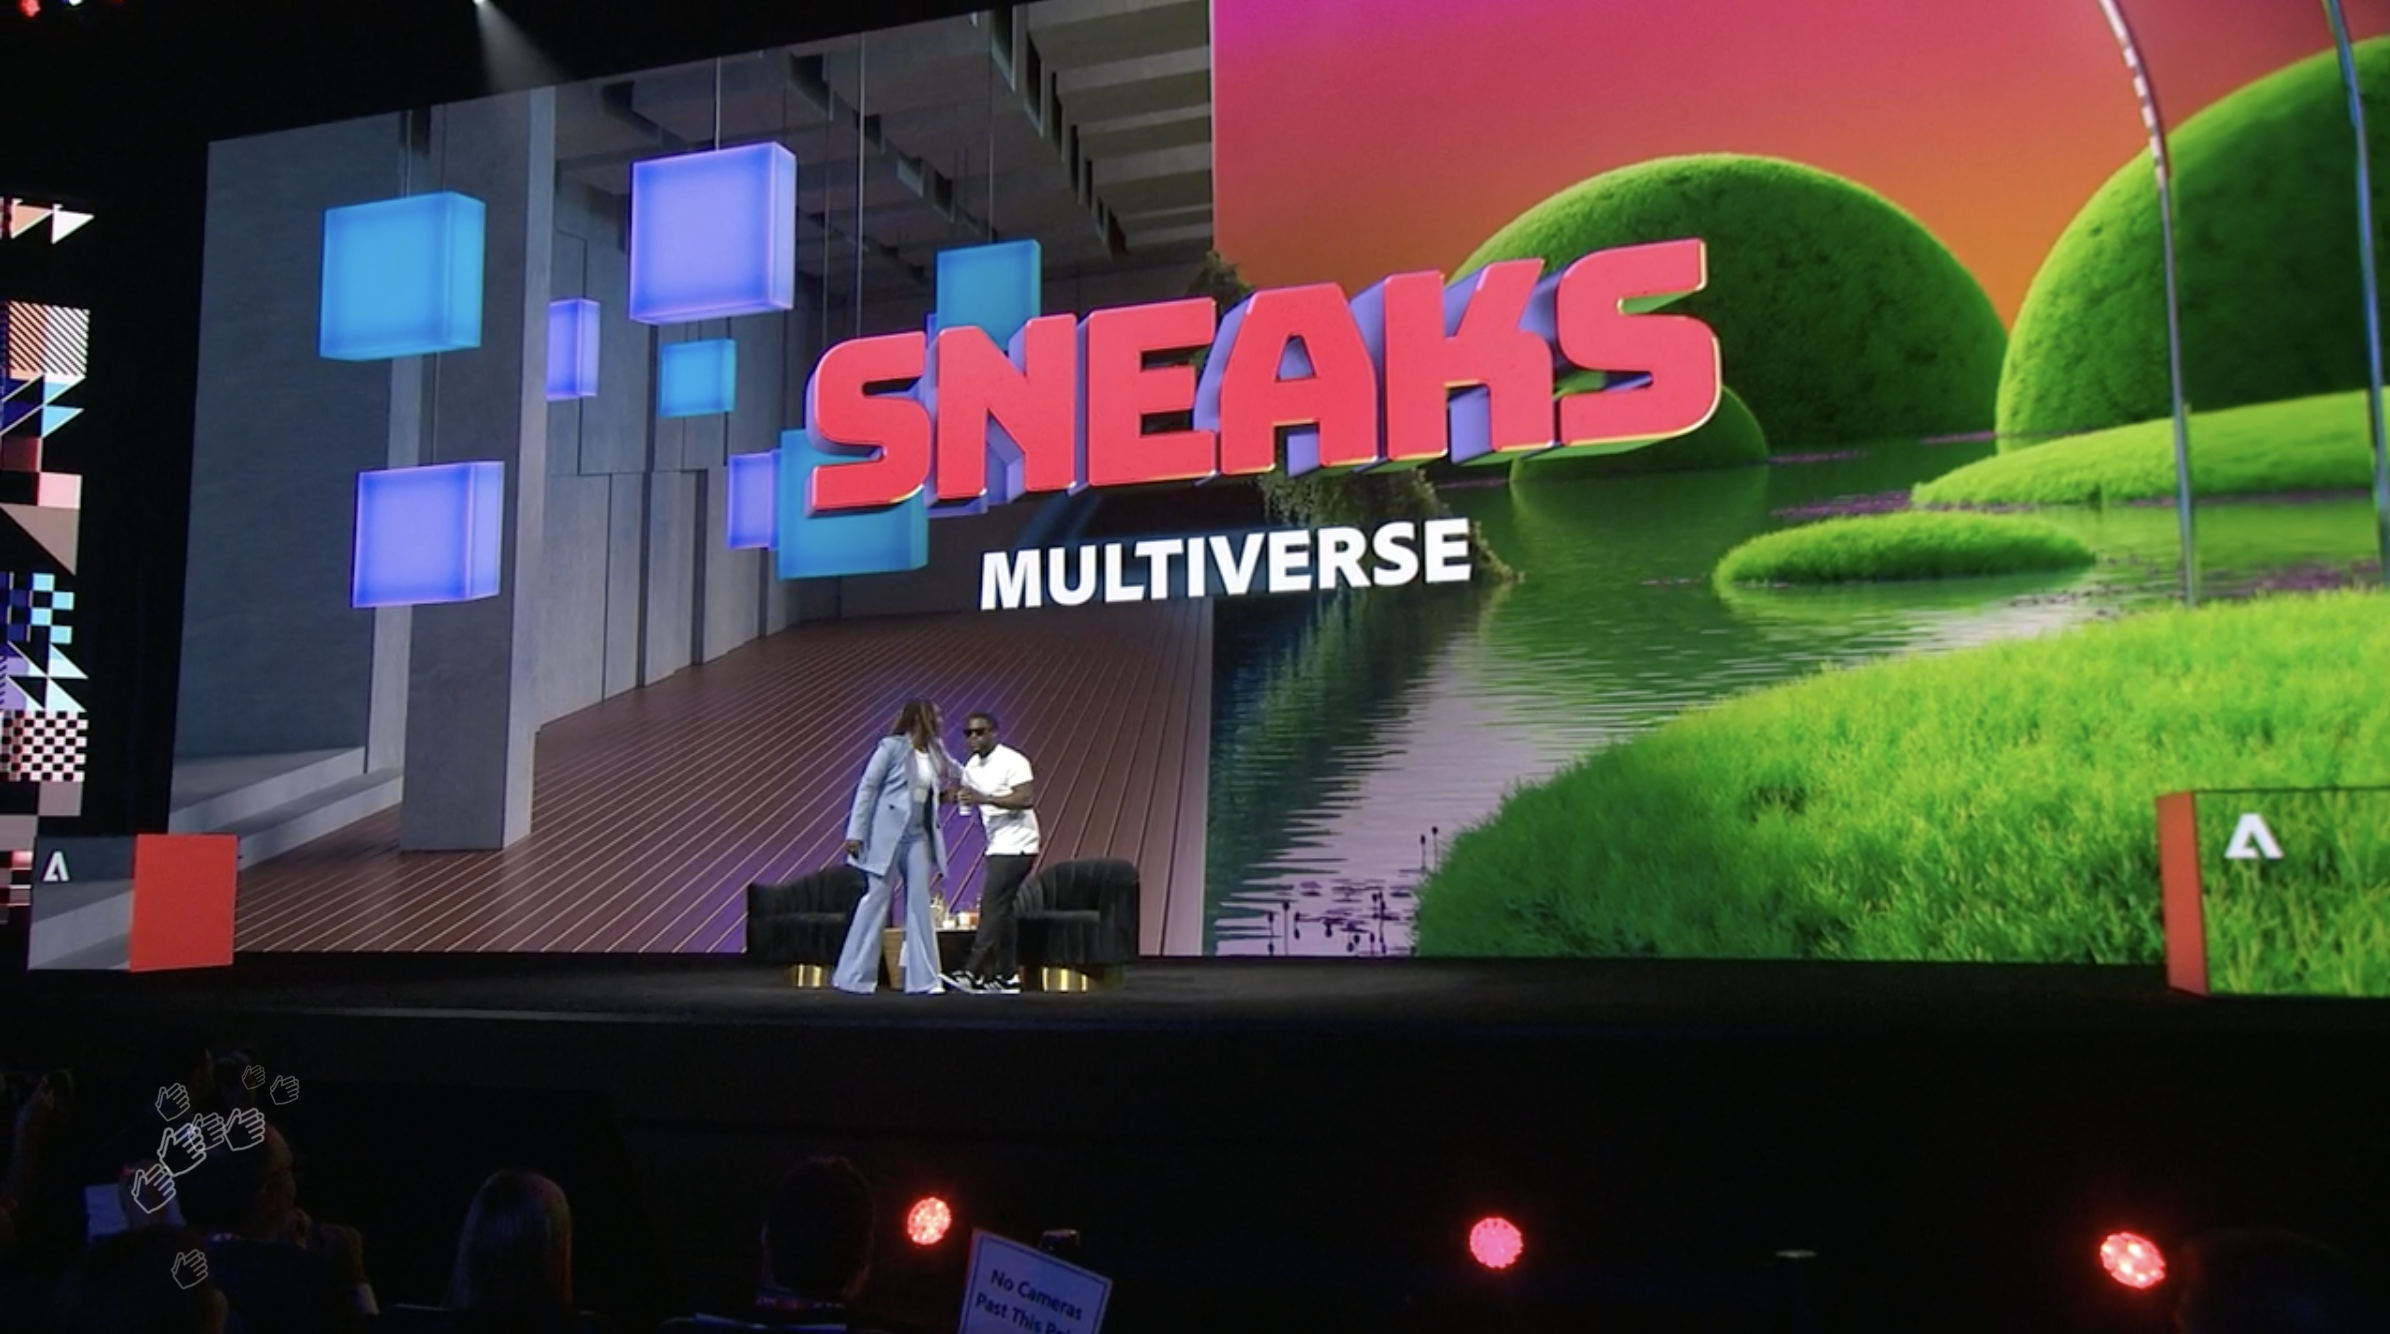 Kevin Hart and Bria Alexander on stage with 'Sneaks Multiverse' text projected in the background